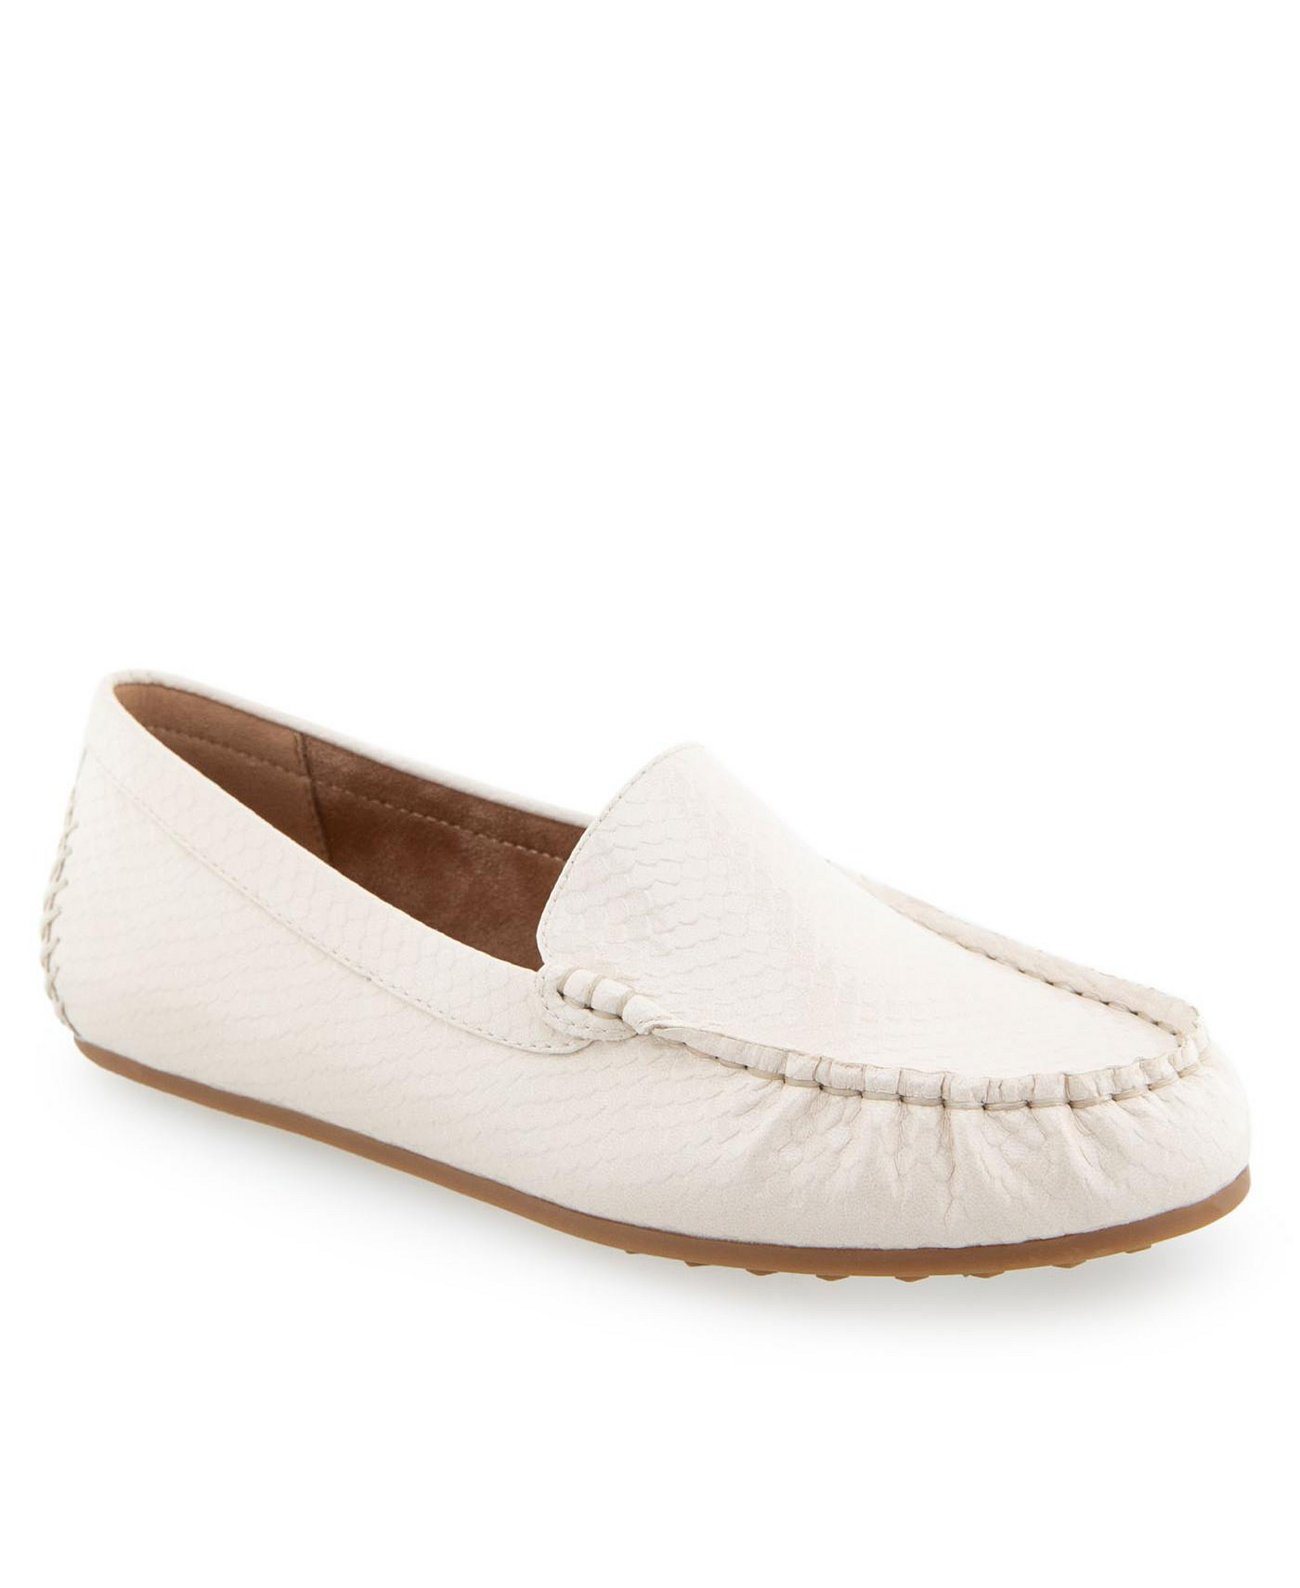 Women's Over Drive Loafers Aerosoles